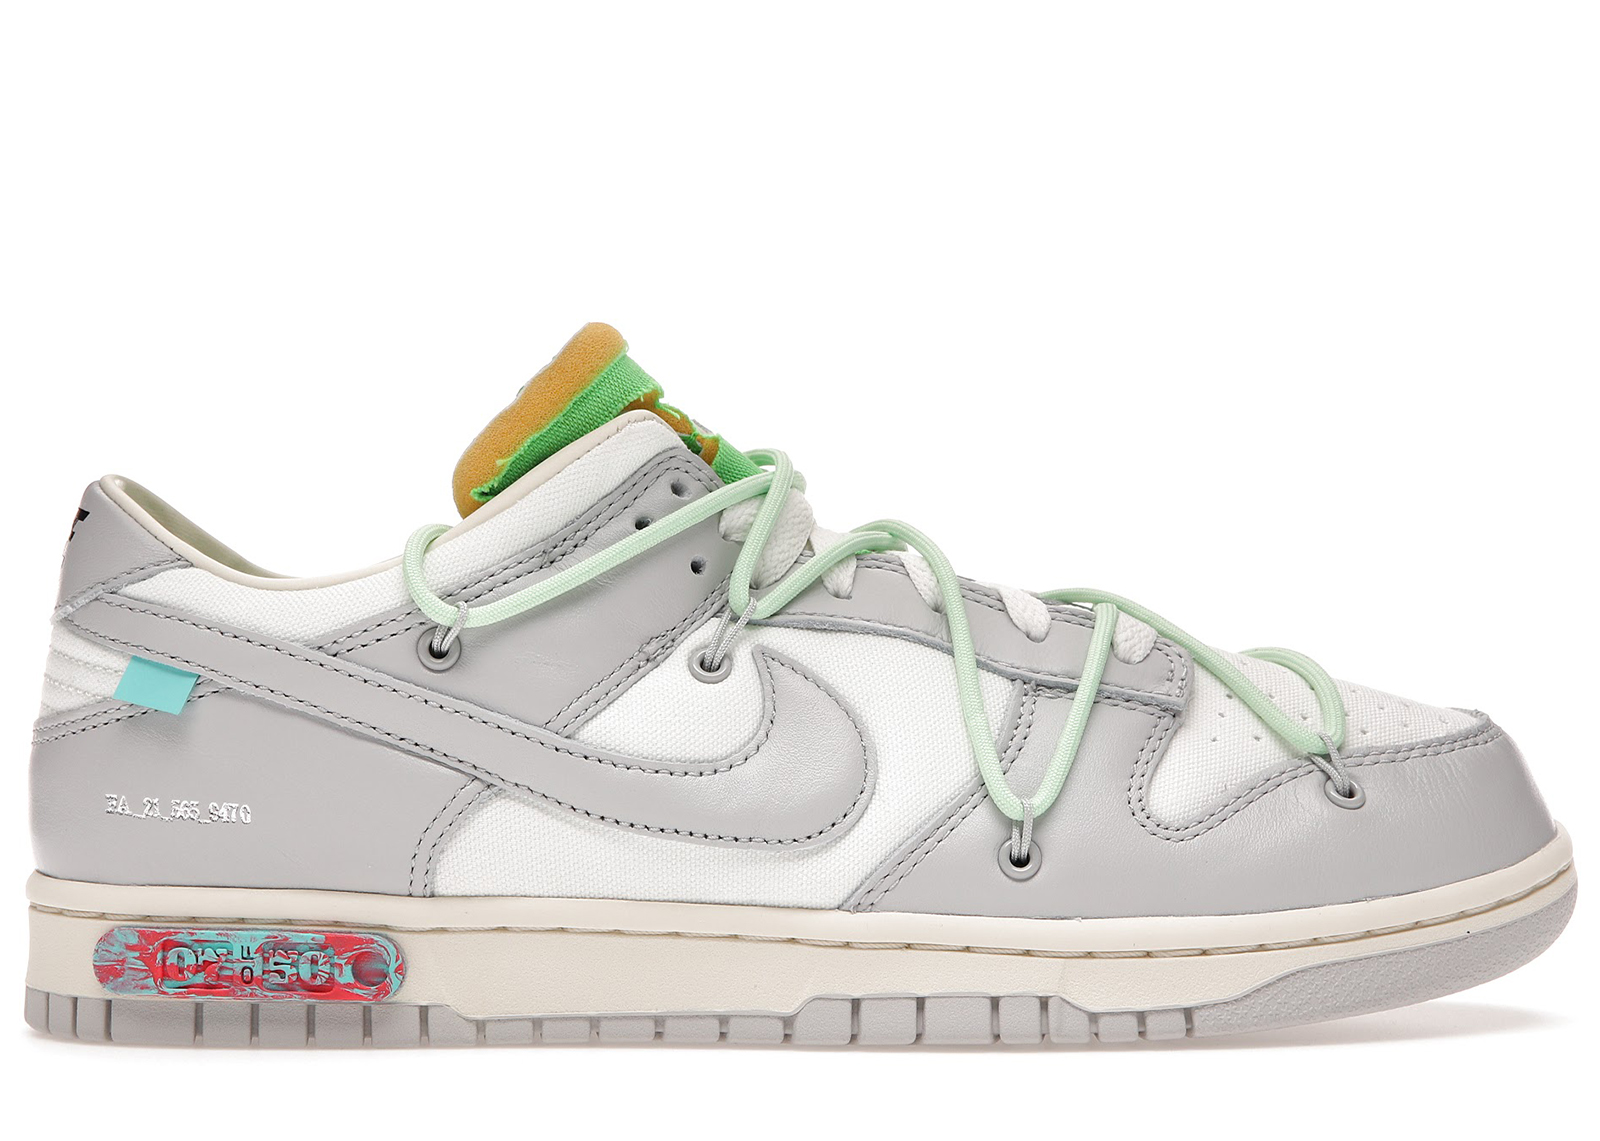 NIKE off-white dunk low 47/50 27.5cm